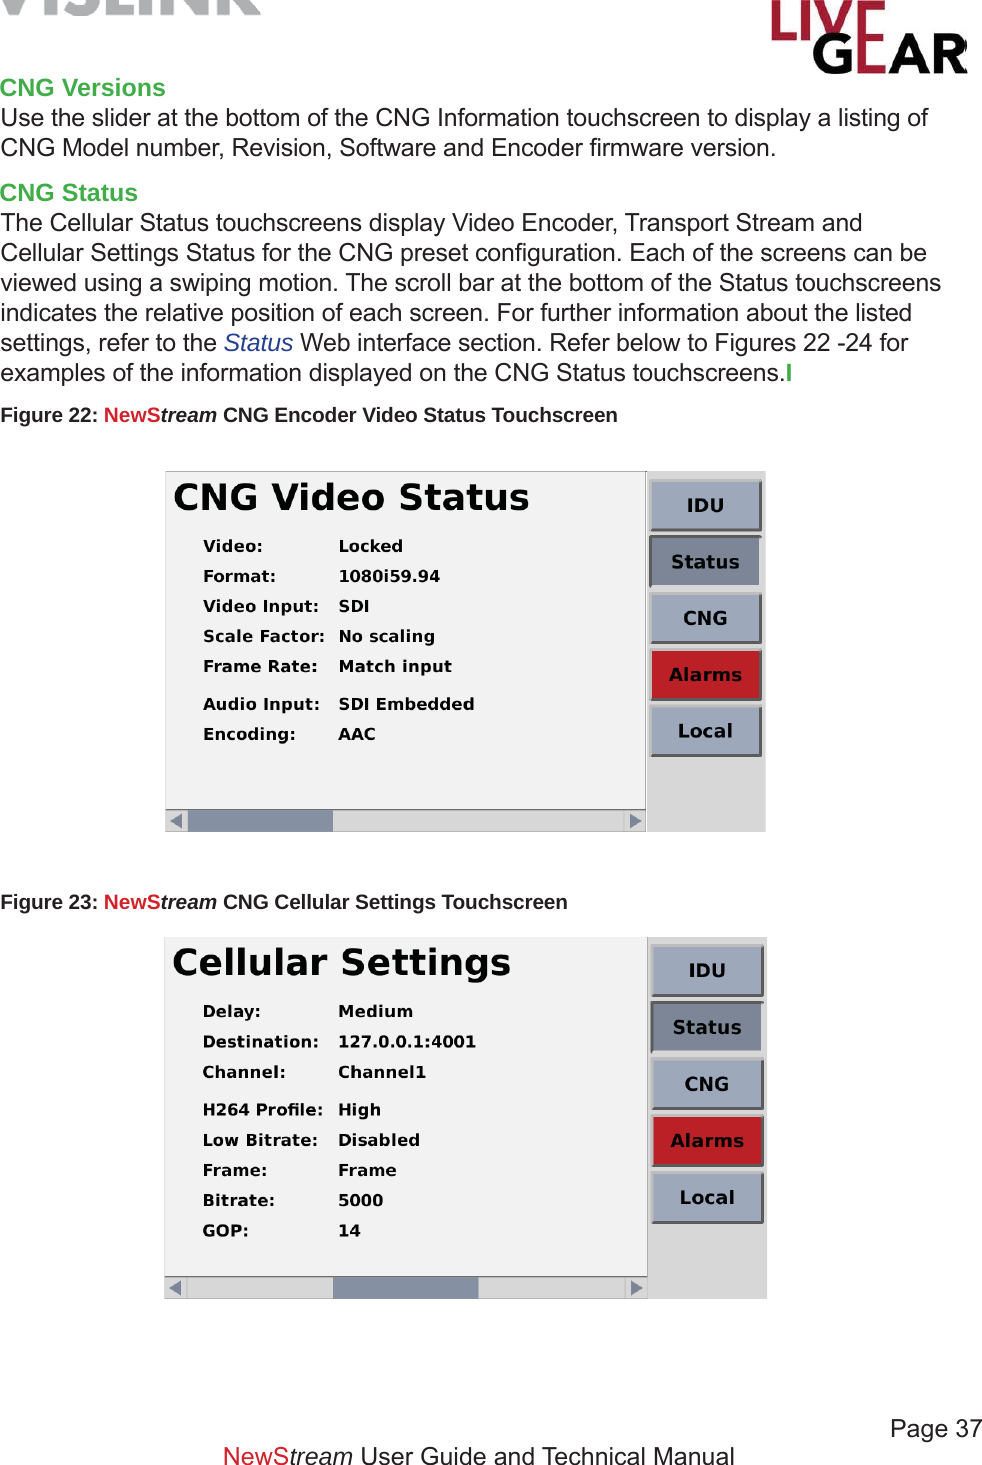             Page 37NewStream User Guide and Technical ManualCNG VersionsUse the slider at the bottom of the CNG Information touchscreen to display a listing of  CNG Model number, Revision, Software and Encoder ﬁ rmware version.CNG StatusThe Cellular Status touchscreens display Video Encoder, Transport Stream and  Cellular Settings Status for the CNG preset conﬁ guration. Each of the screens can be viewed using a swiping motion. The scroll bar at the bottom of the Status touchscreens indicates the relative position of each screen. For further information about the listed settings, refer to the Status Web interface section. Refer below to Figures 22 -24 for examples of the information displayed on the CNG Status touchscreens.IFigure 22: NewStream CNG Encoder Video Status Touchscreen Figure 23: NewStream CNG Cellular Settings Touchscreen 